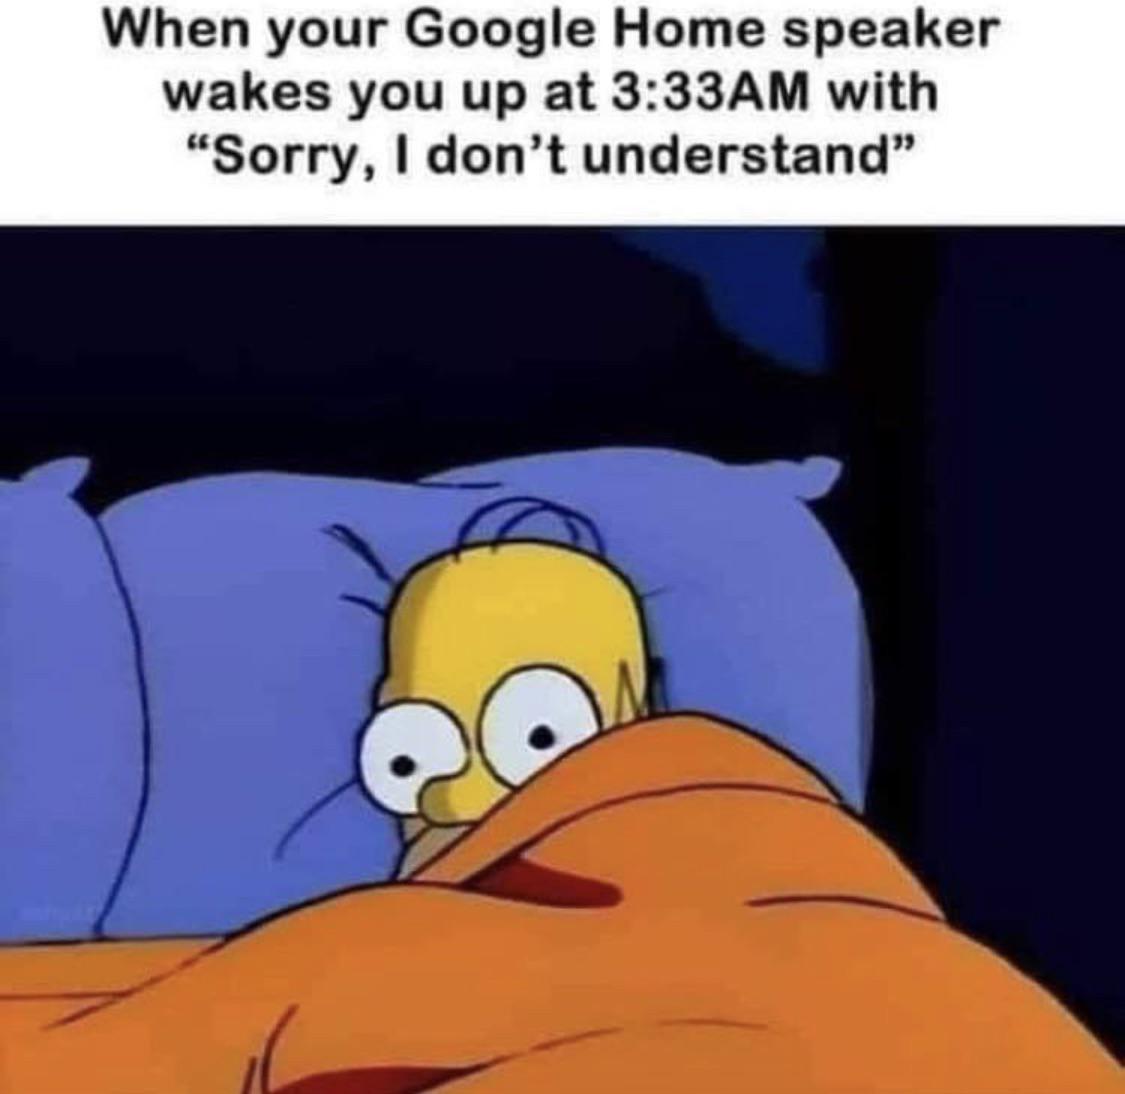 funny memes and pics - 3 am memes - When your Google Home speaker wakes you up at Am with "Sorry, I don't understand"